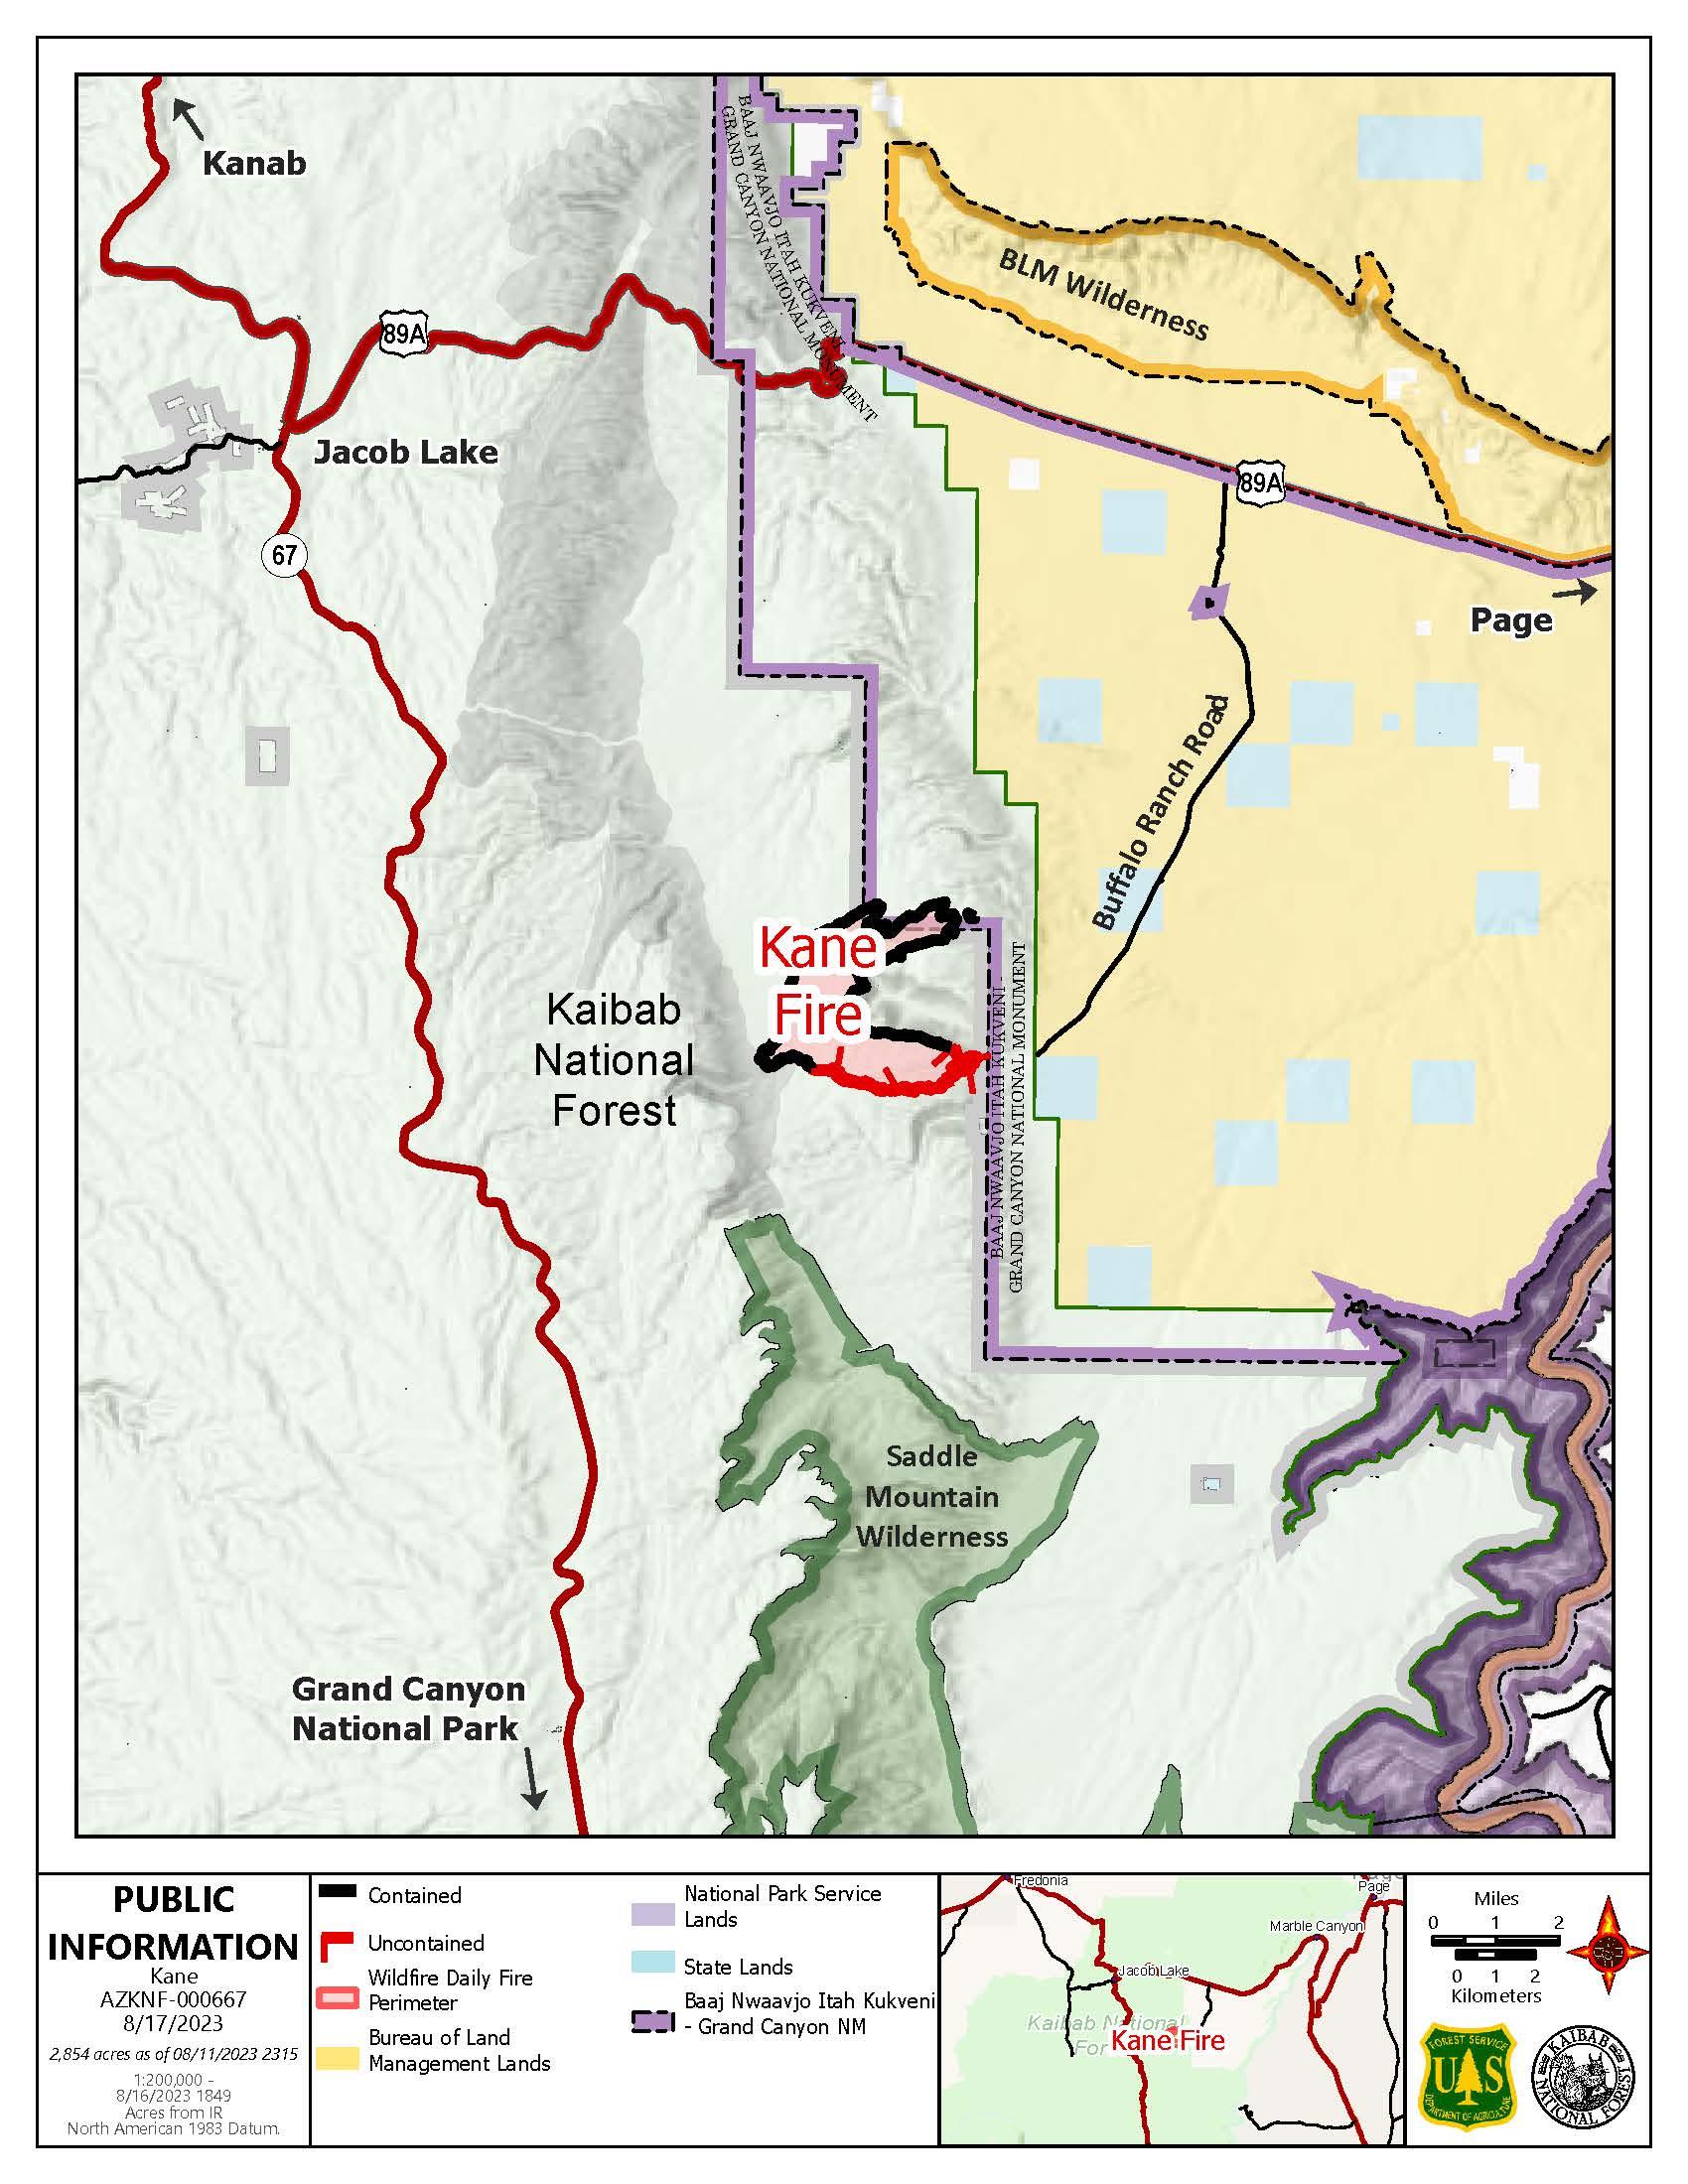 Map of the Kane Fire area for 8/17.